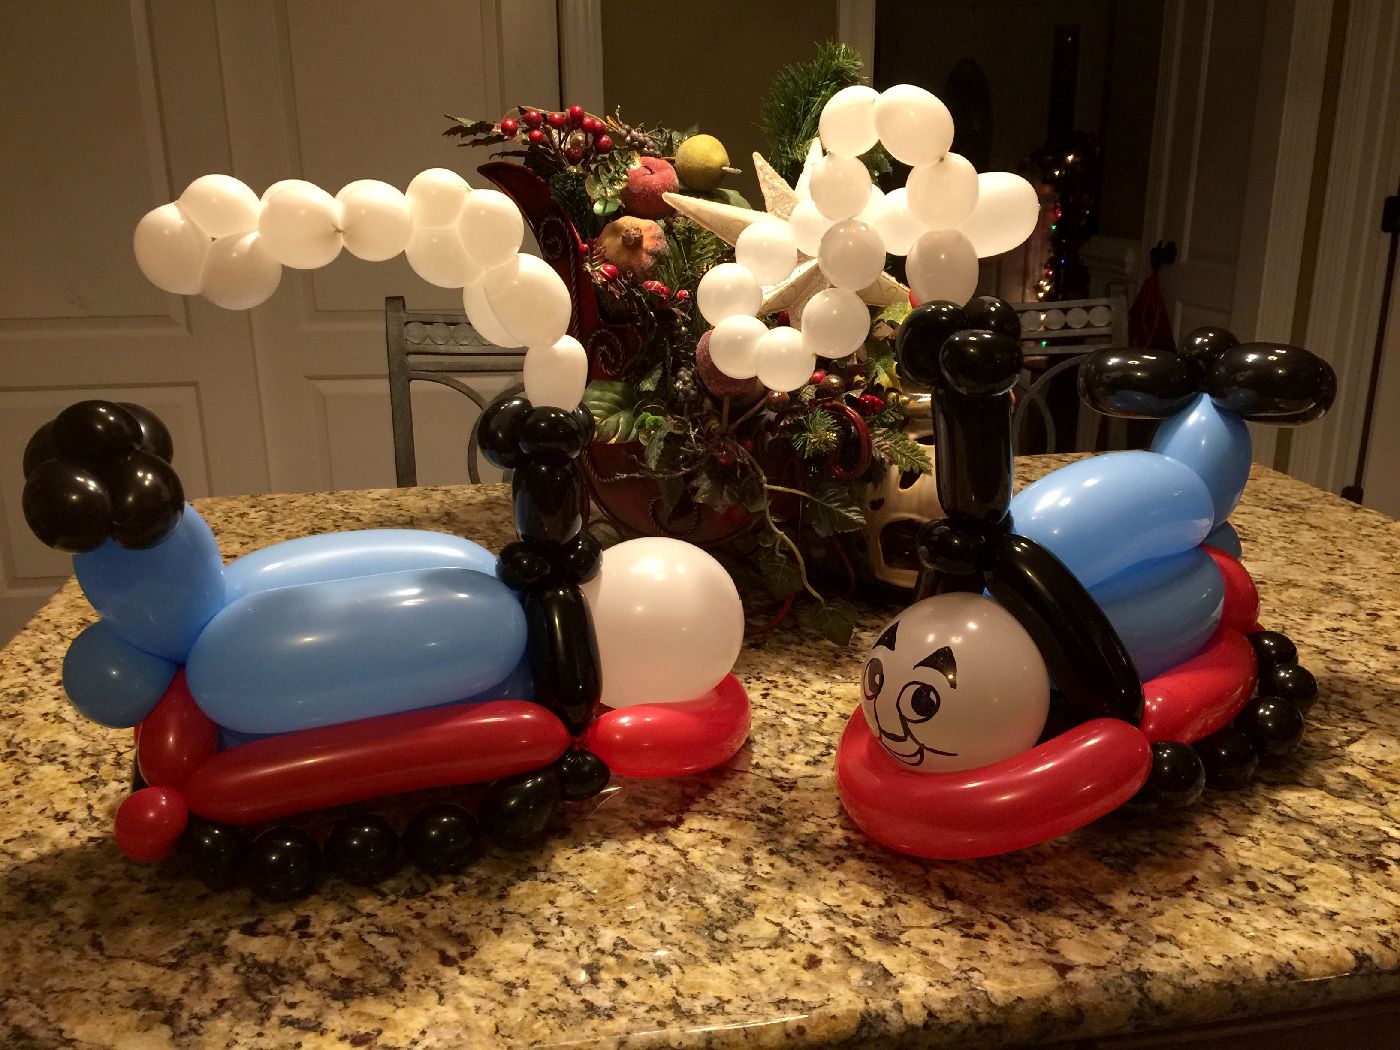 Train balloon decorations for Raleigh events